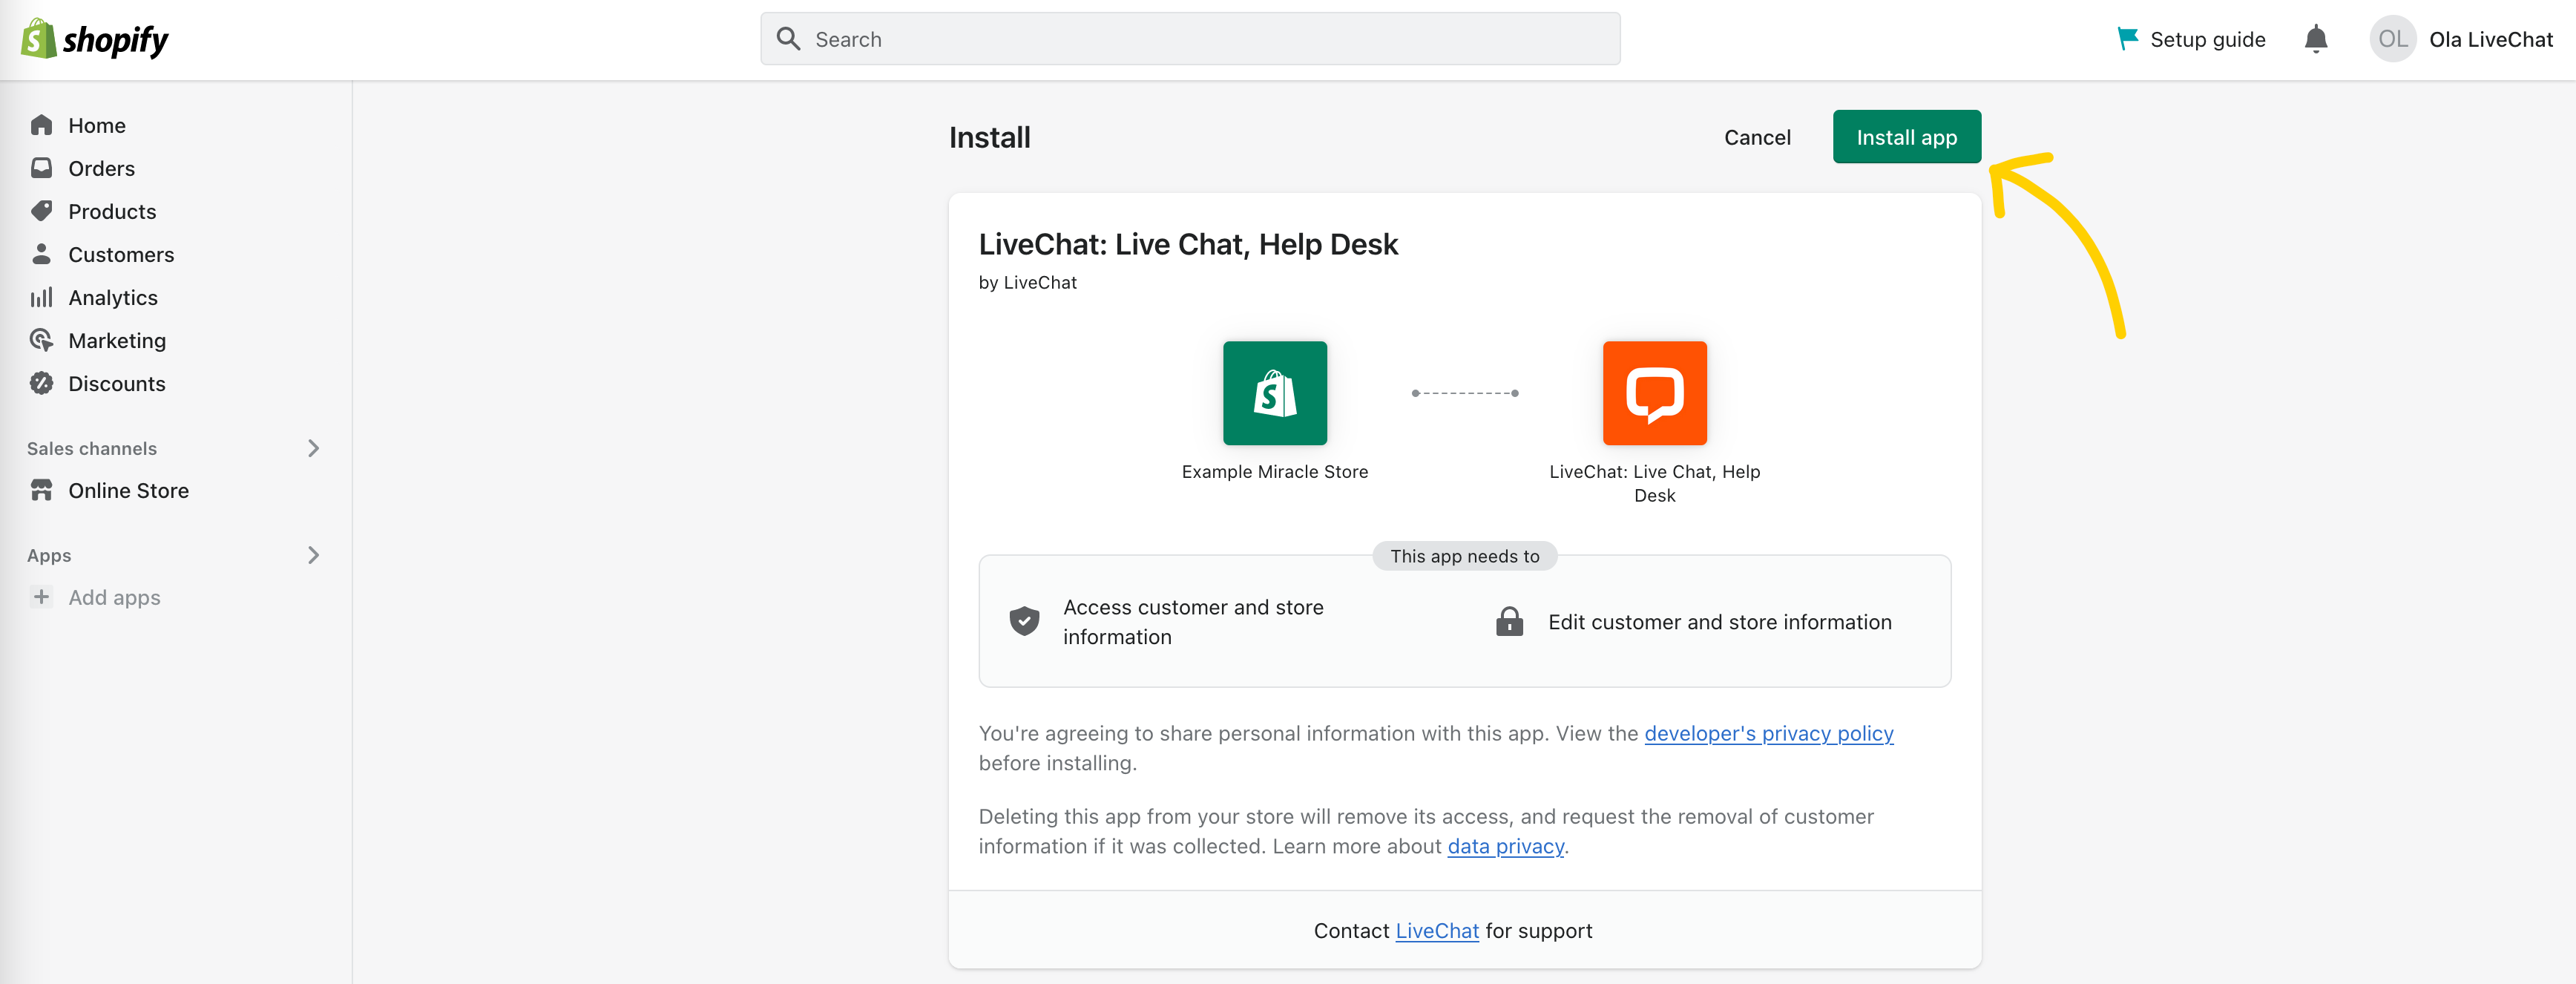 Install LiveChat app in Shopify store